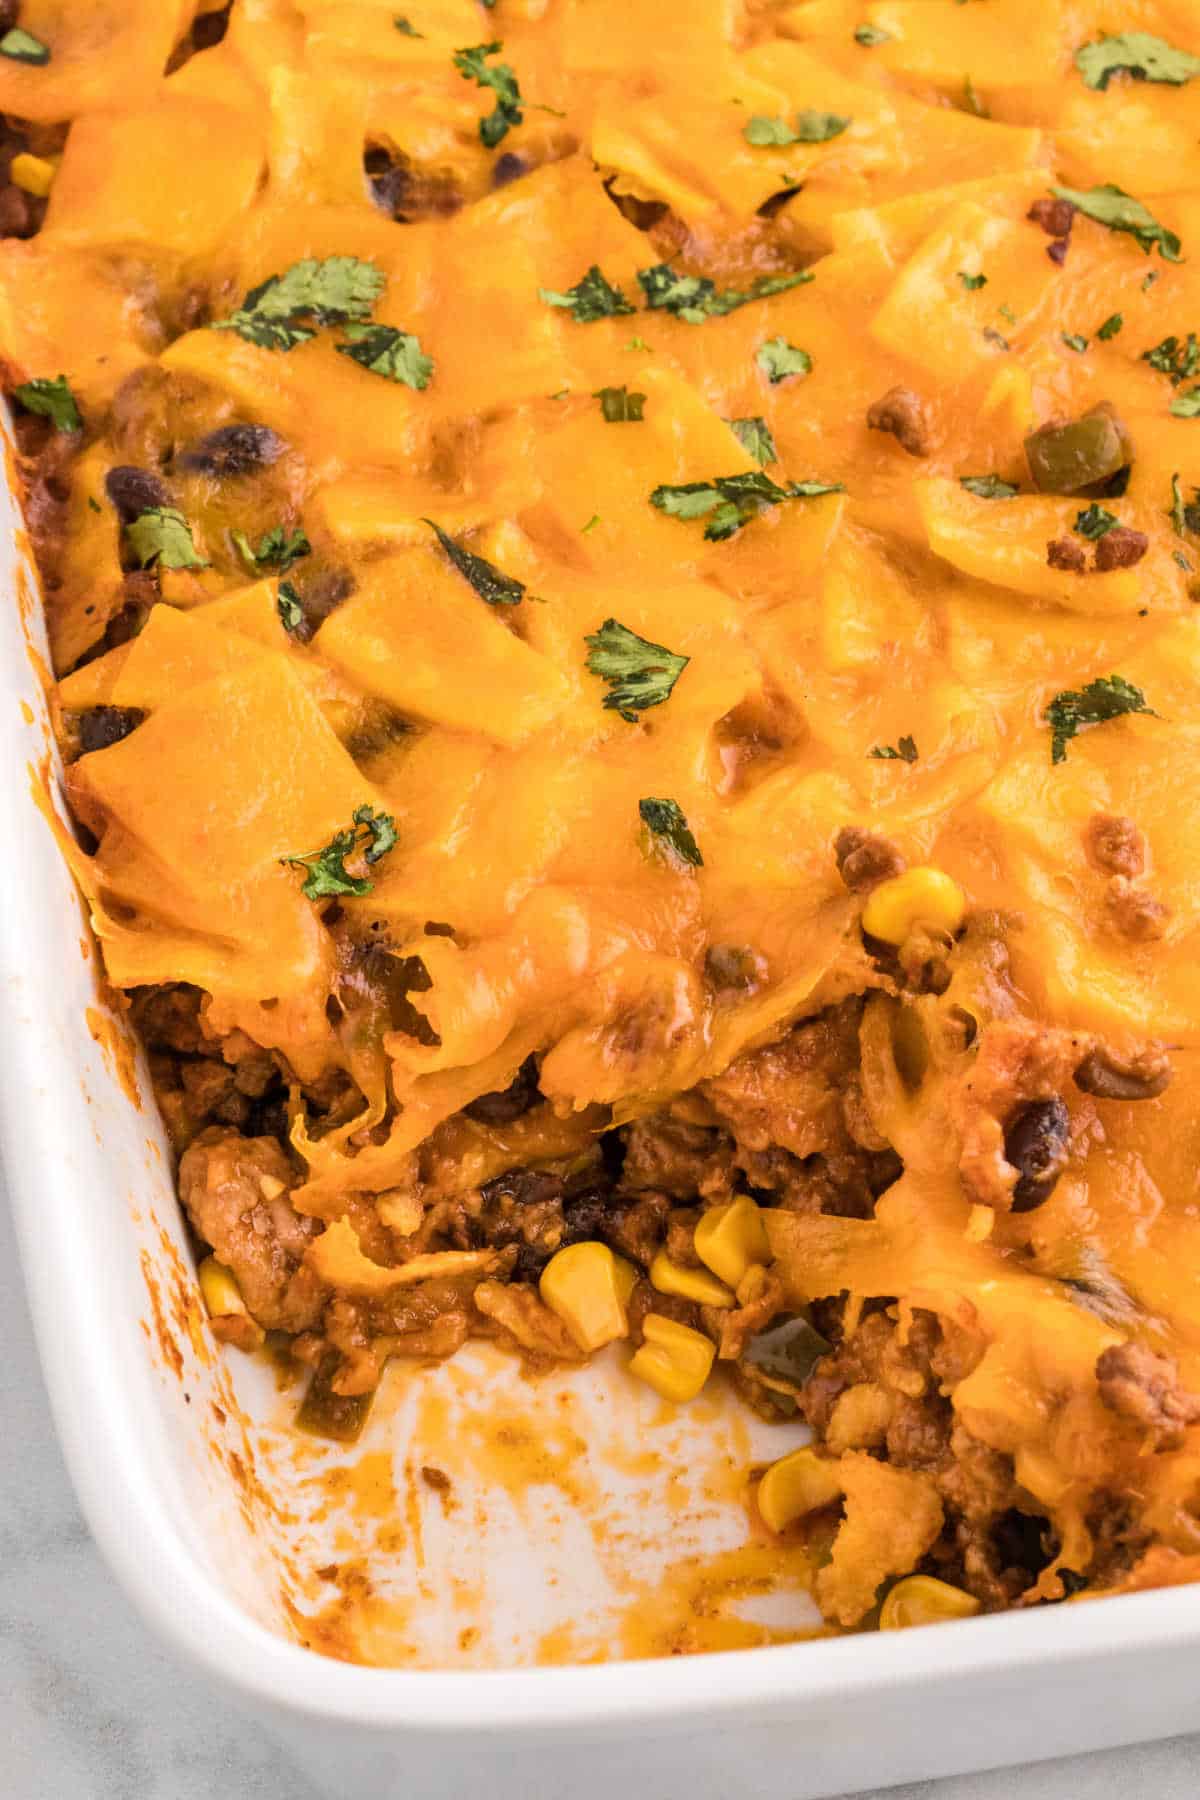 Beef enchilada casserole with a piece missing.